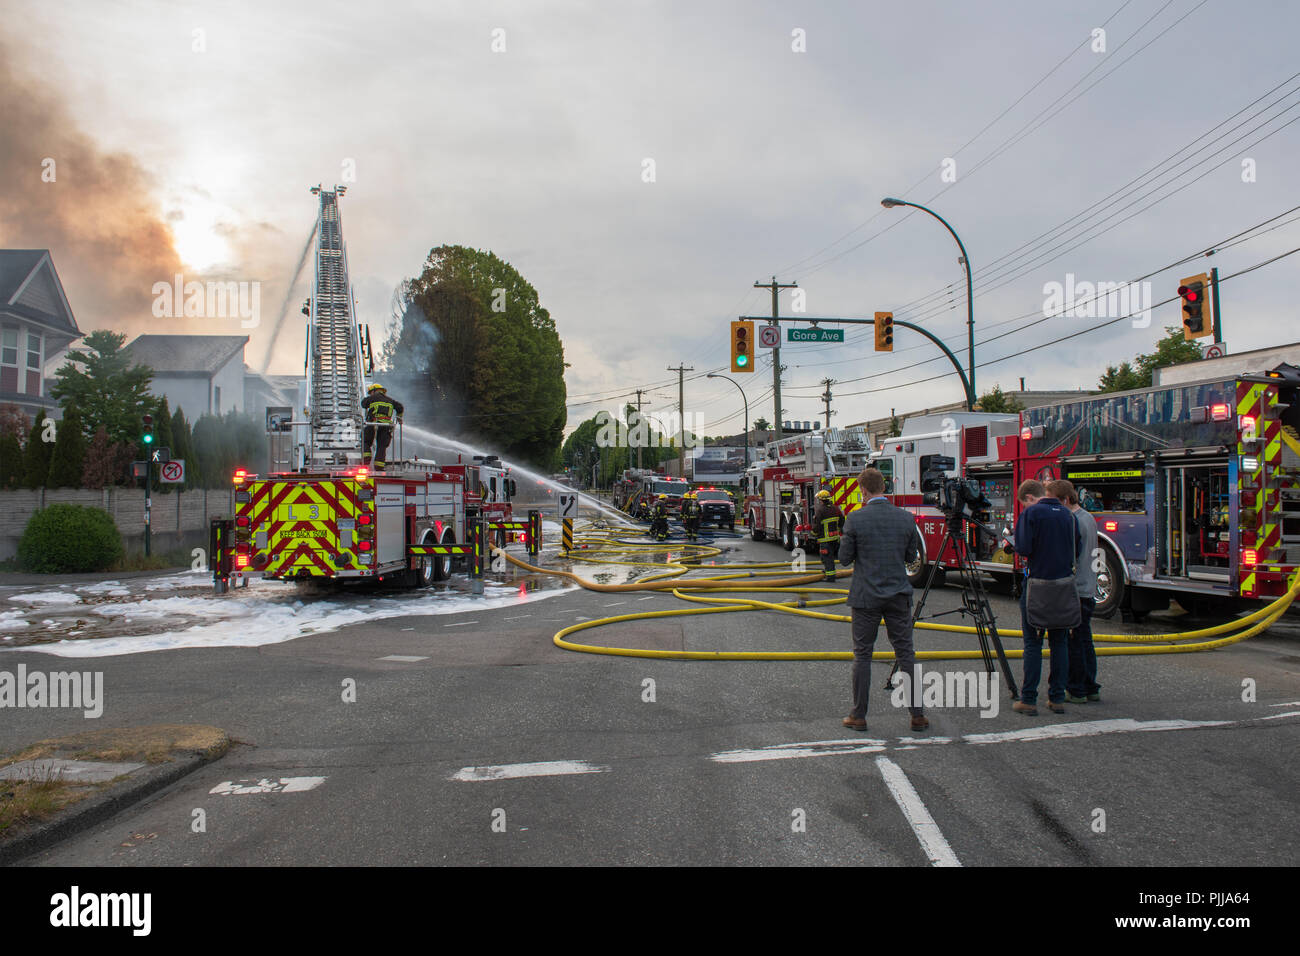 Reporters in foreground reporting on emergency fire trucks and firemen at the scene of a house fire, Vancouver city. Stock Photo